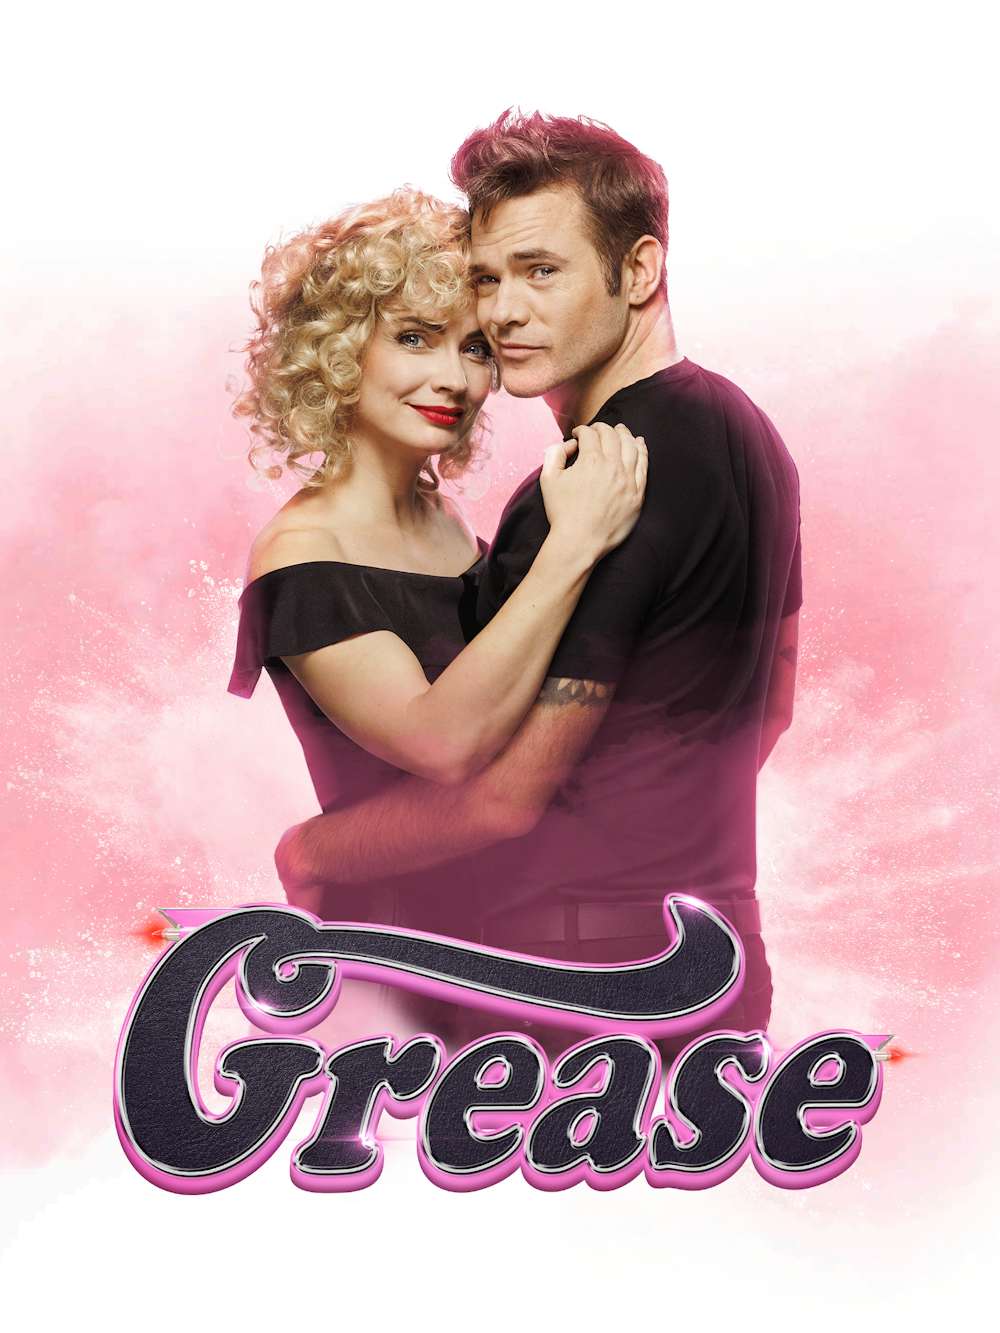 Grease Poster JMN